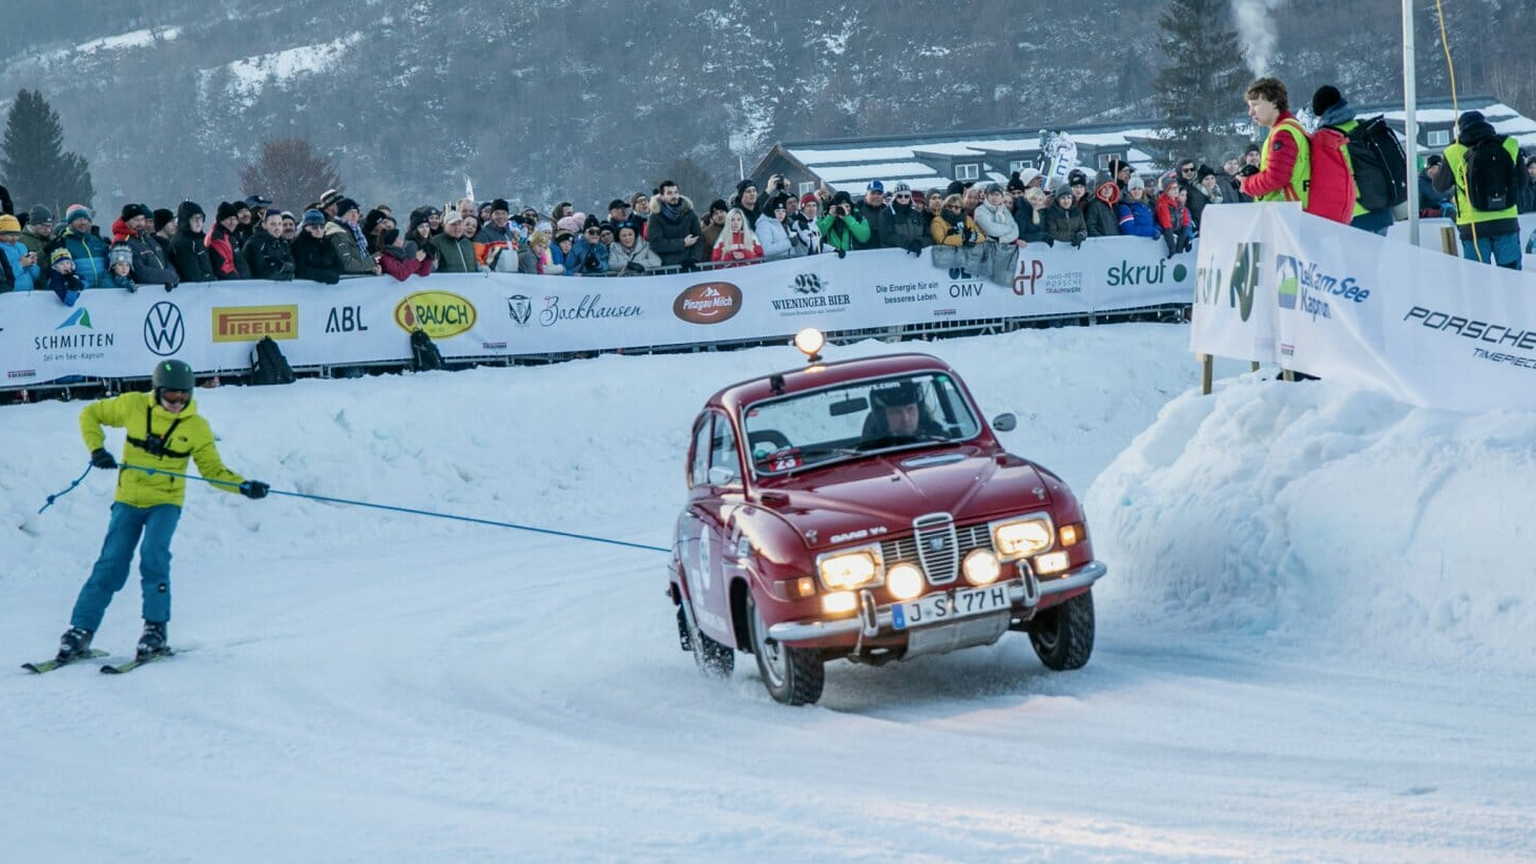 Saab skijoring at the second GP Ice Race weekend